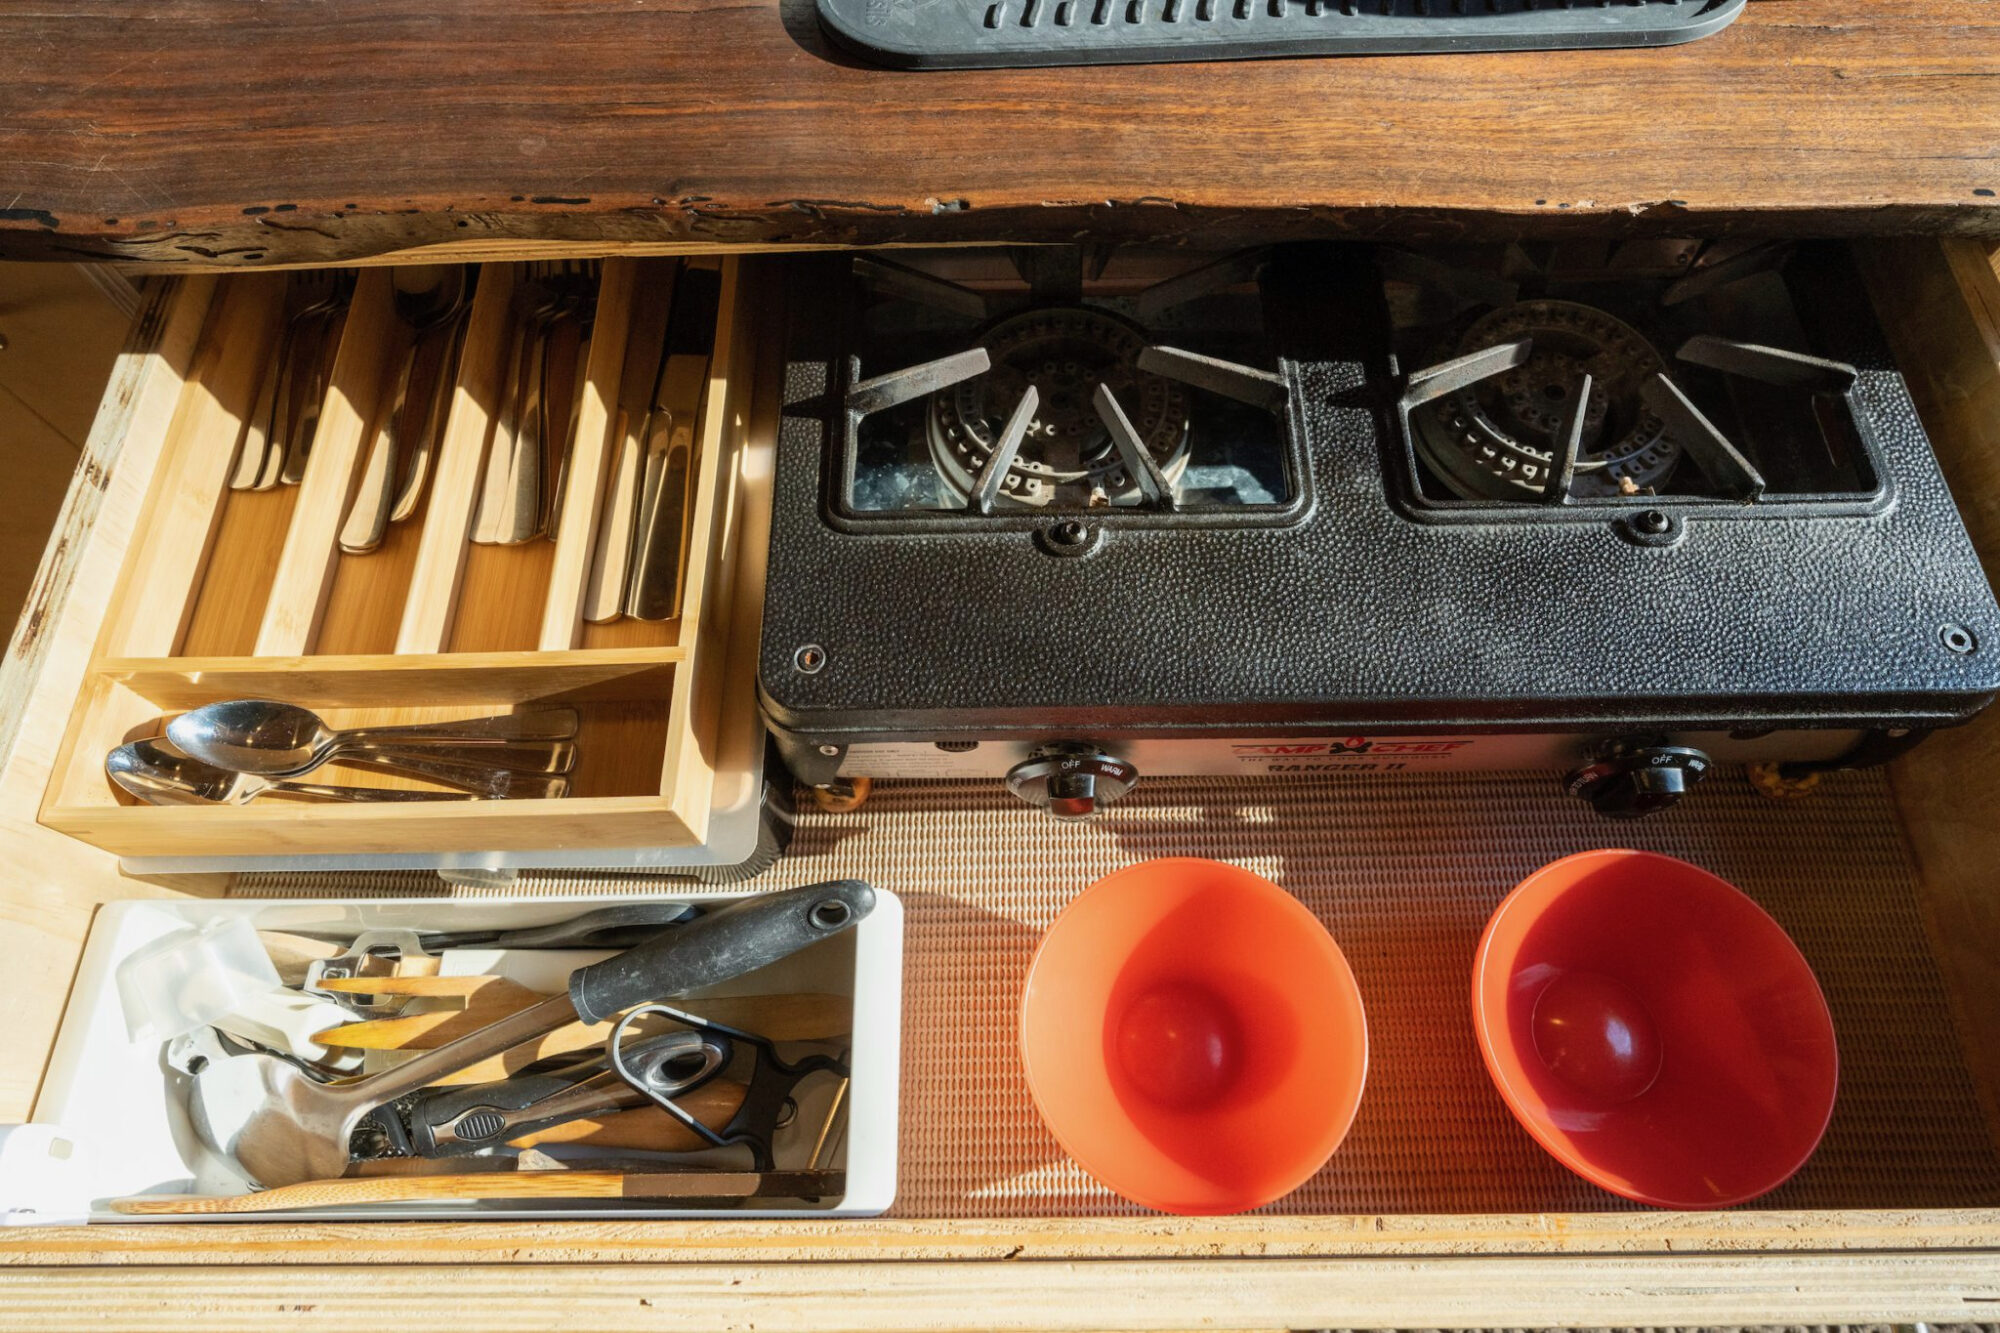 Utensils and a propane burner in a drawer.